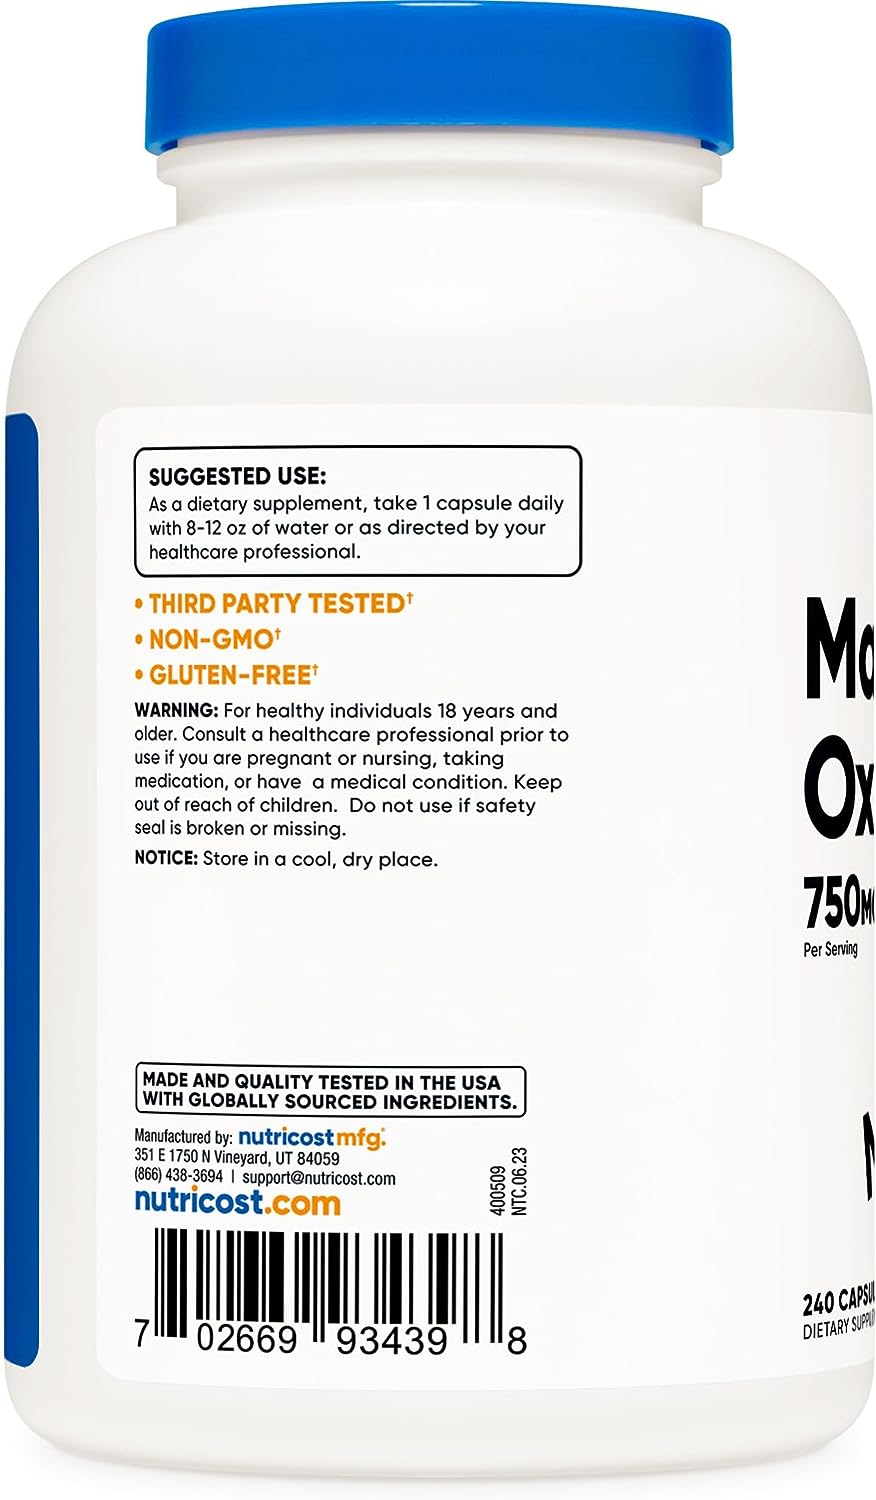  Nutricost Magnesium Oxide 750mg, 240 Capsules - 420mg of Ma